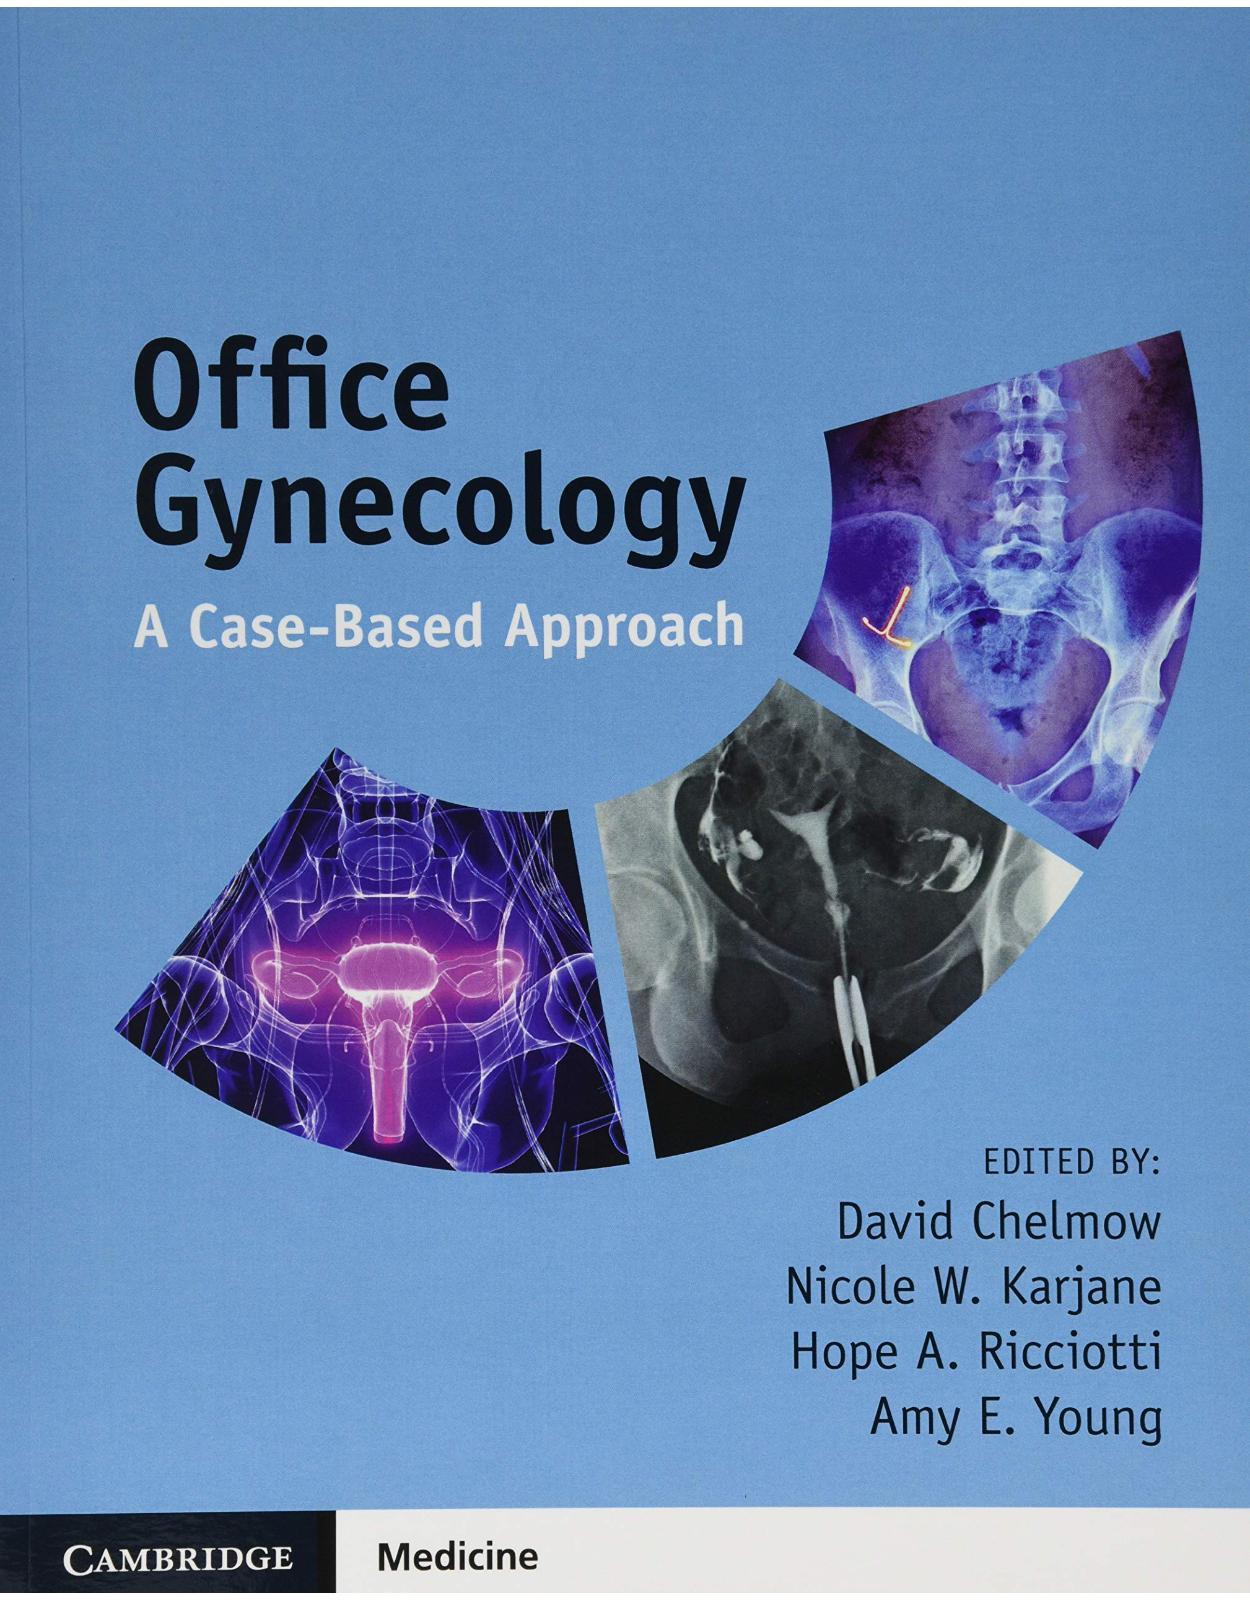 Office Gynecology: A Case-Based Approach